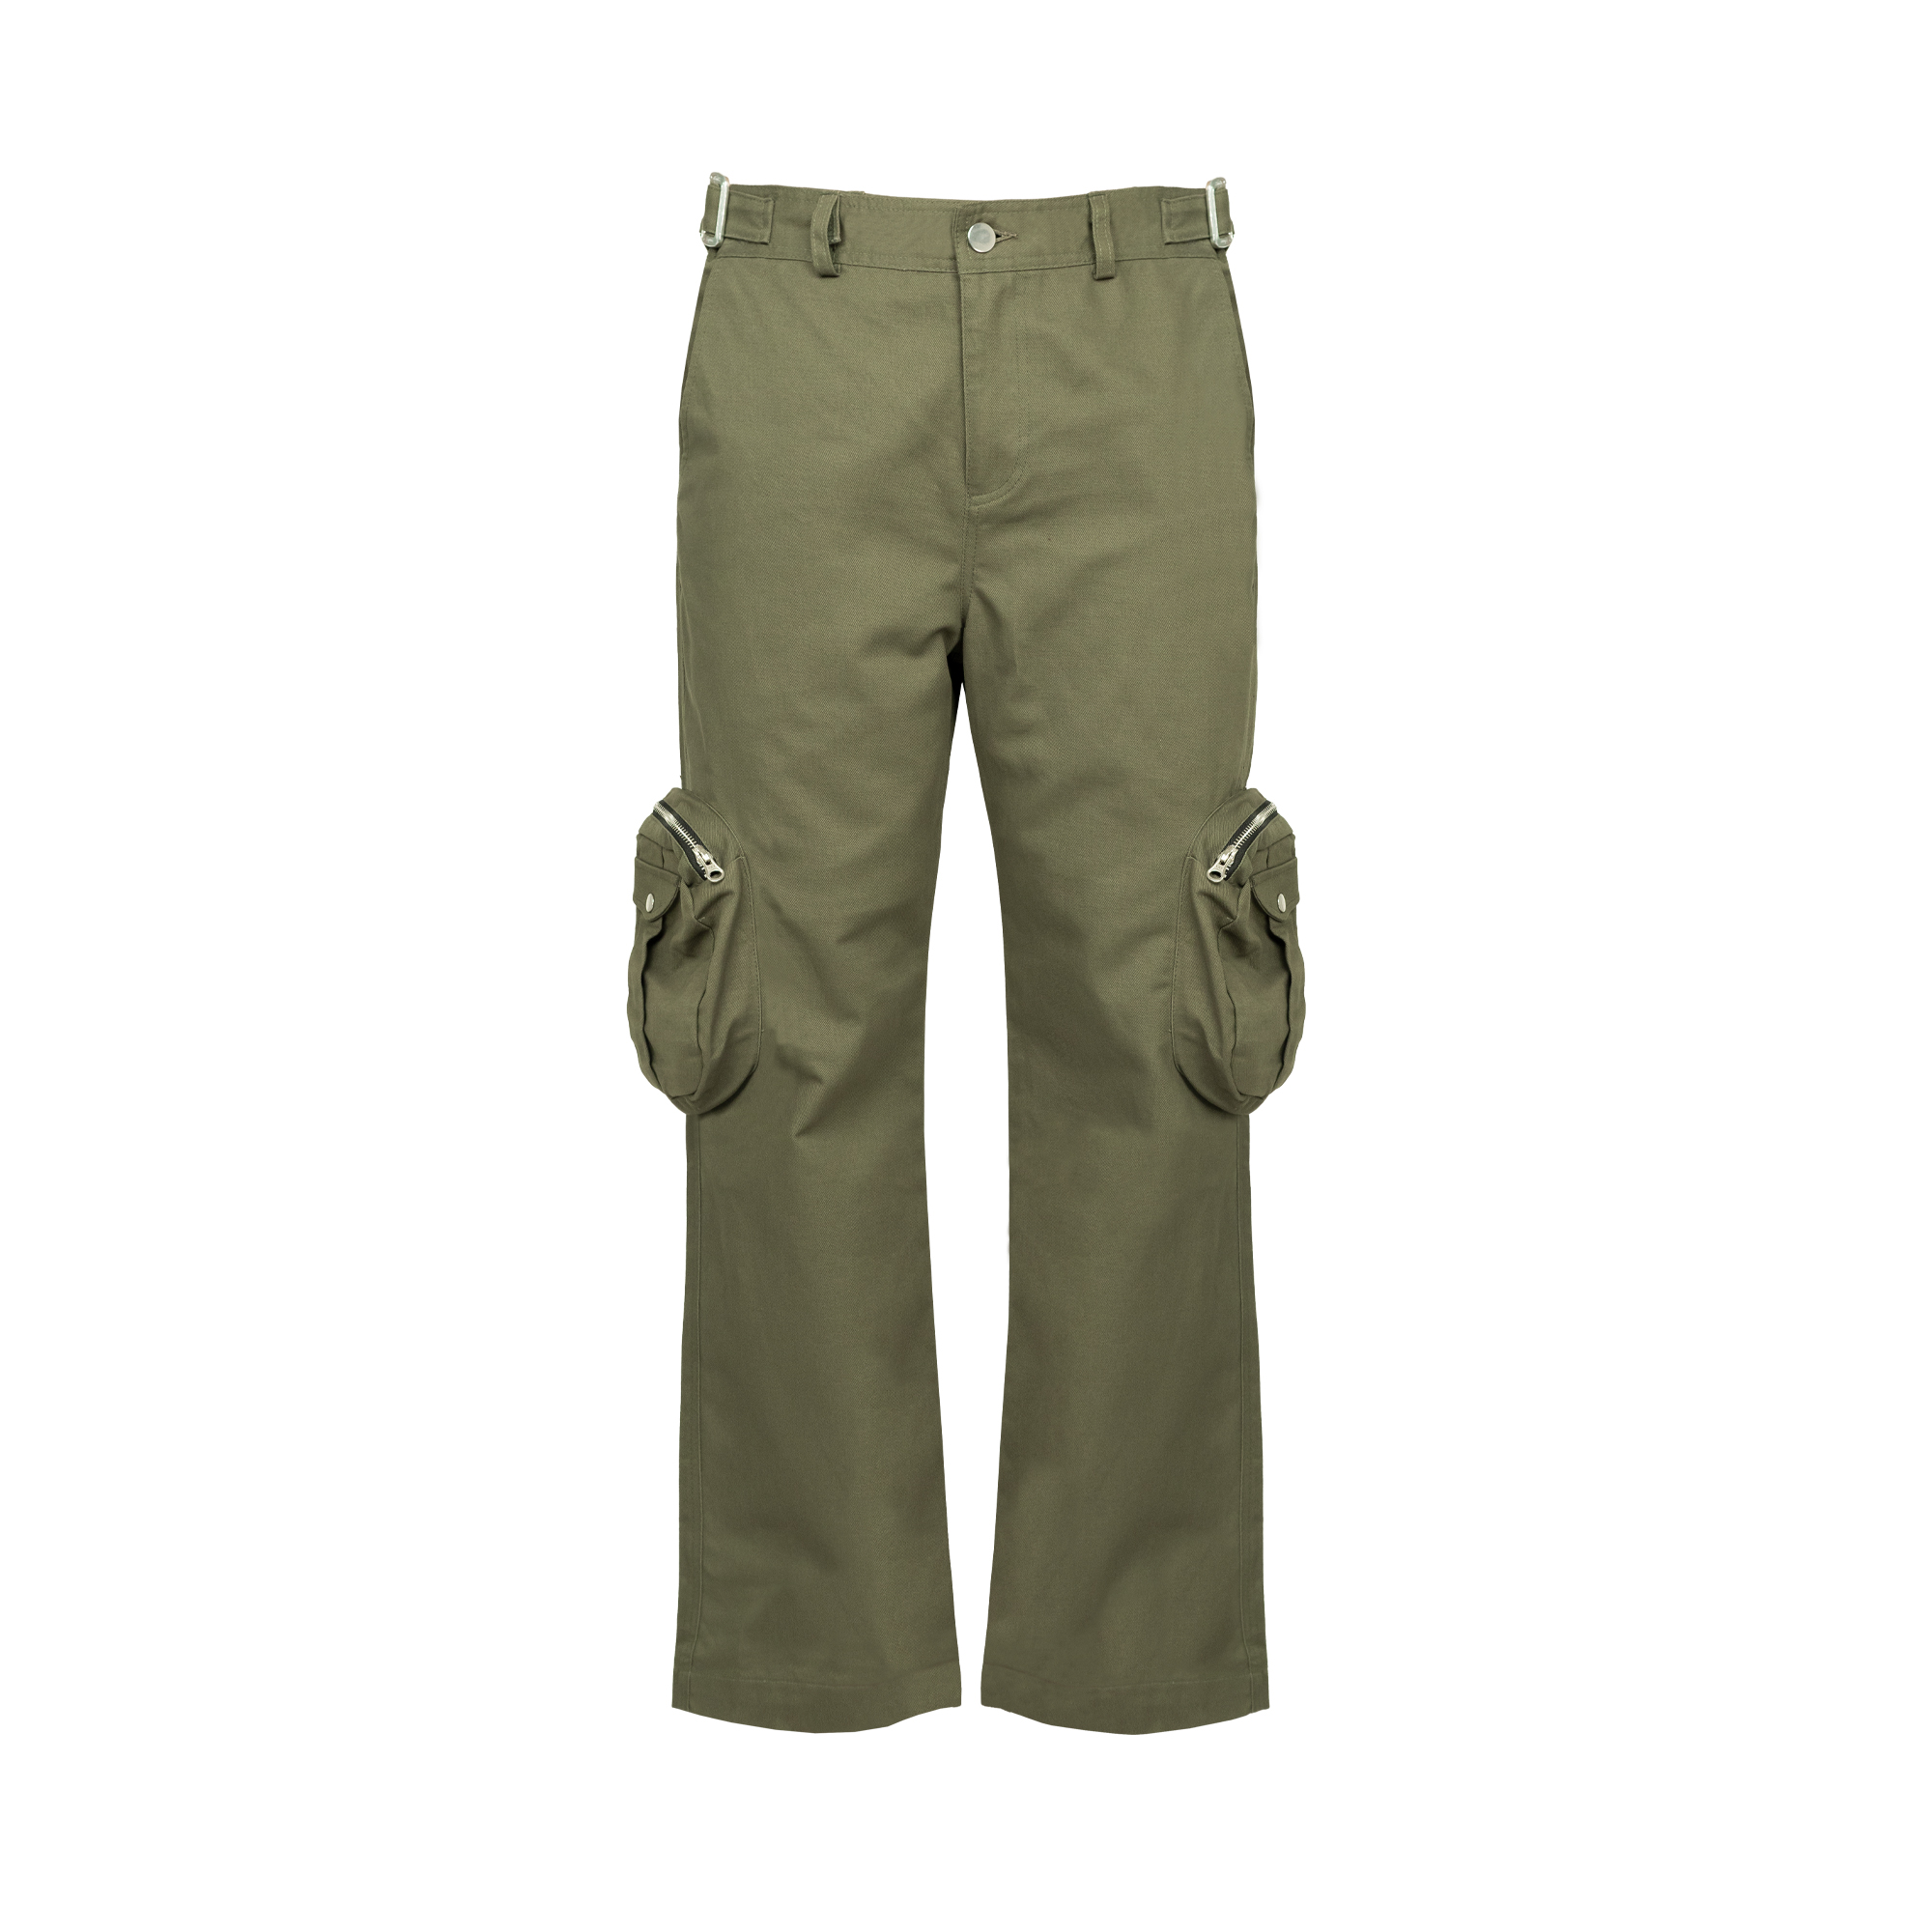 U S Polo Assn Camouflage Cargo Pant in Coimbatore - Dealers, Manufacturers  & Suppliers - Justdial